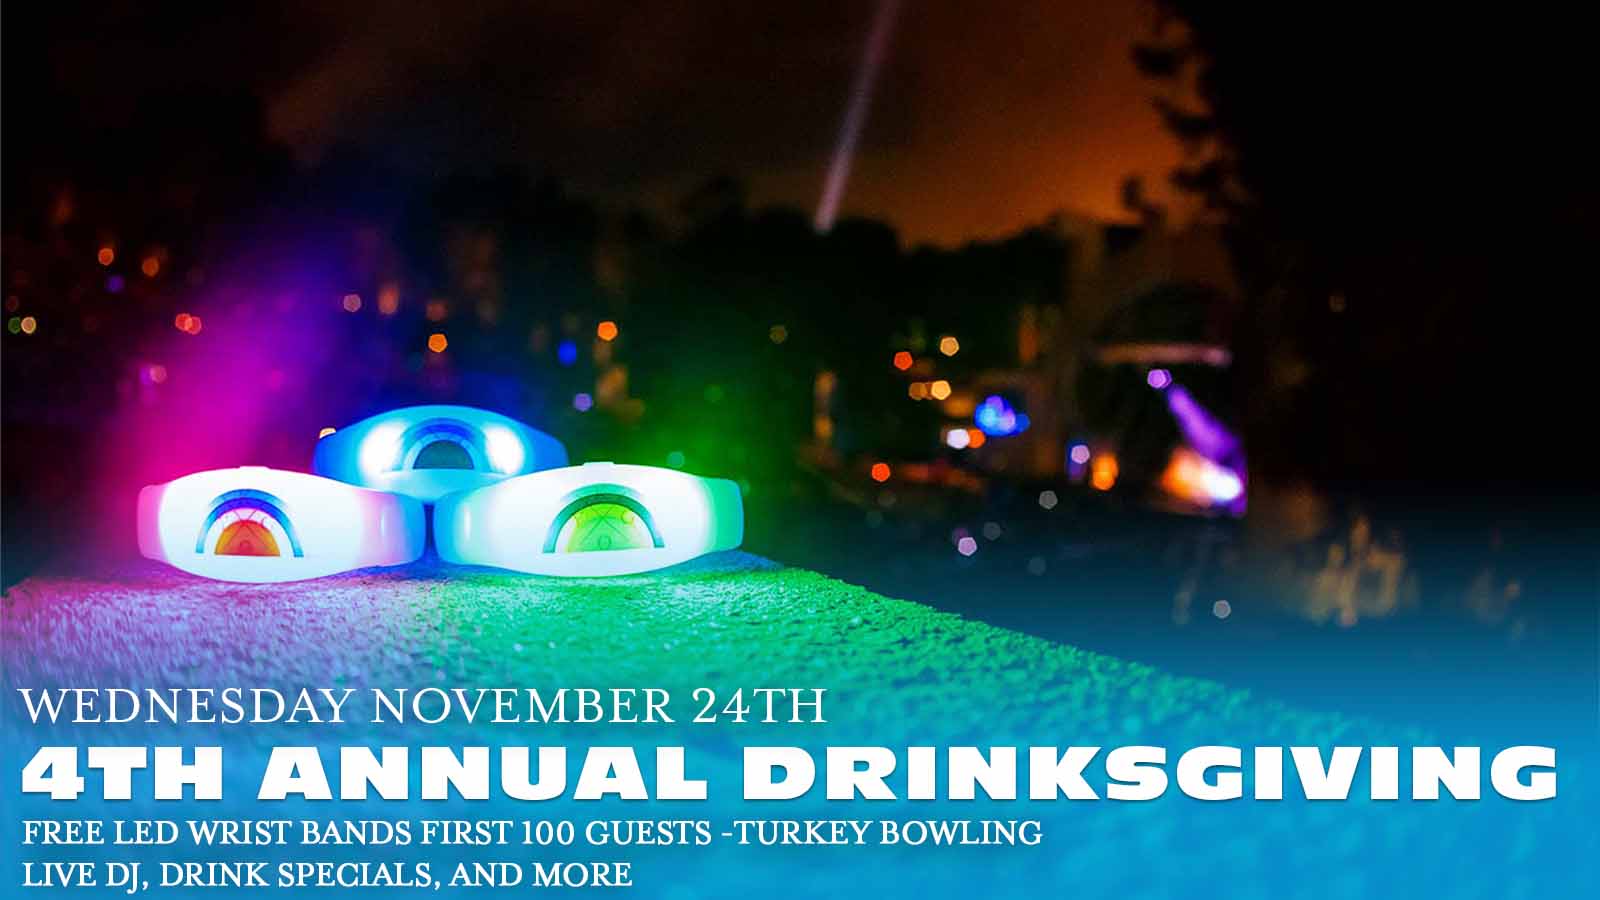 Pick's Annual Drinksgiving 2021 - Night Before Thanksgiving - Wednesday, November 25th Get ready! It's Picks 4th Annual Drinksgiving Party